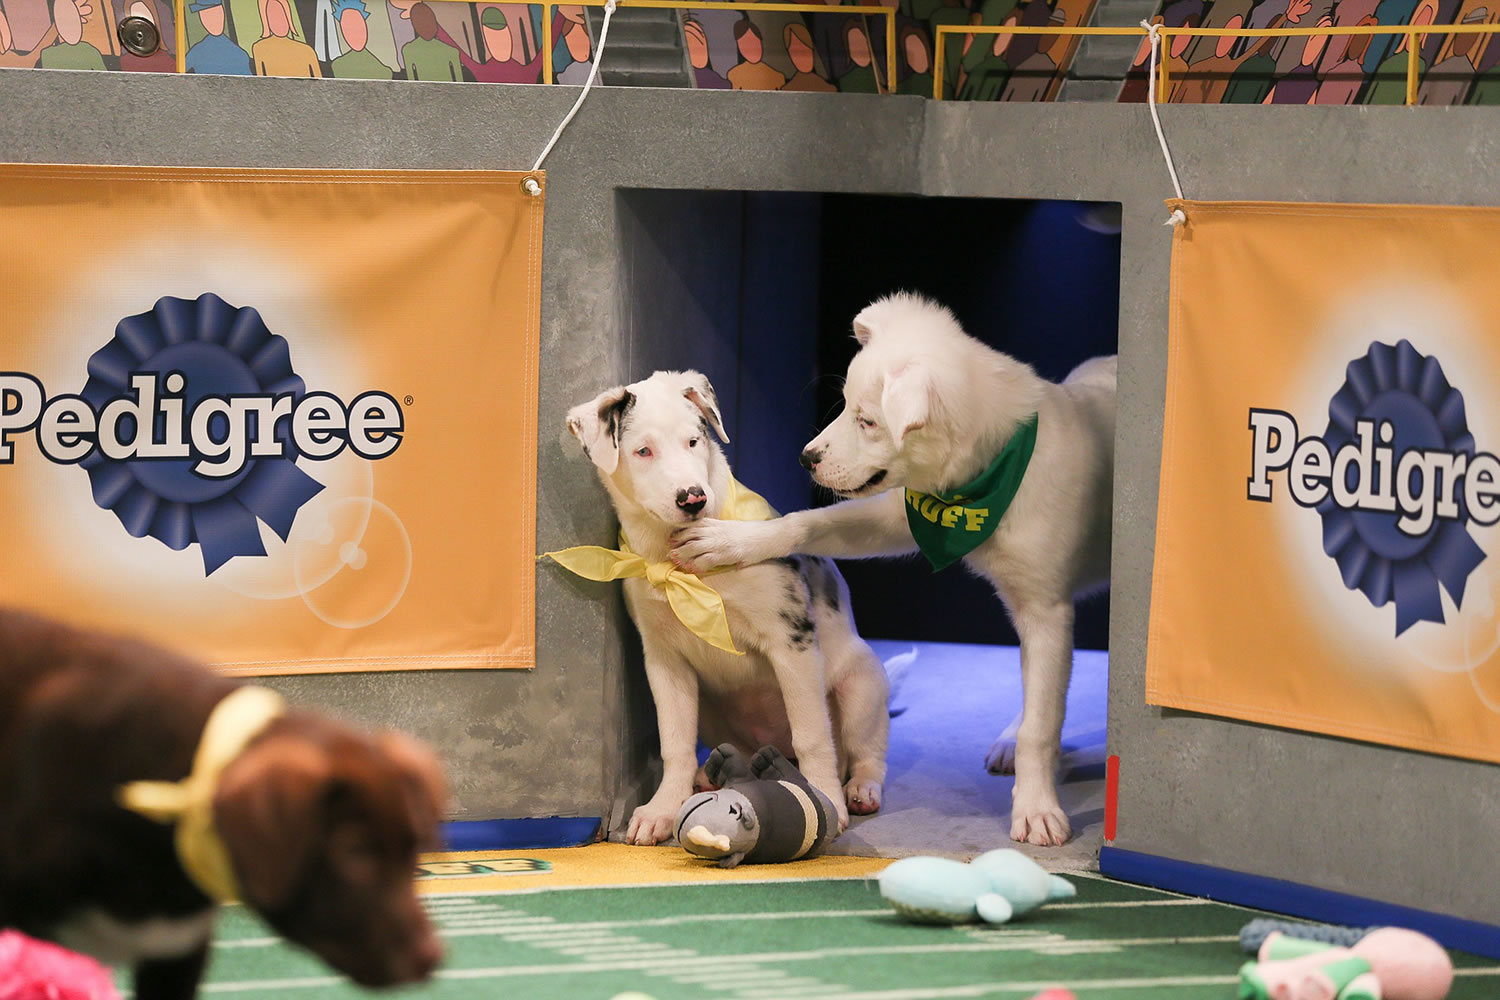 Some puppies want a timeout; others want to keep playing in the &quot;Puppy Bowl.&quot;